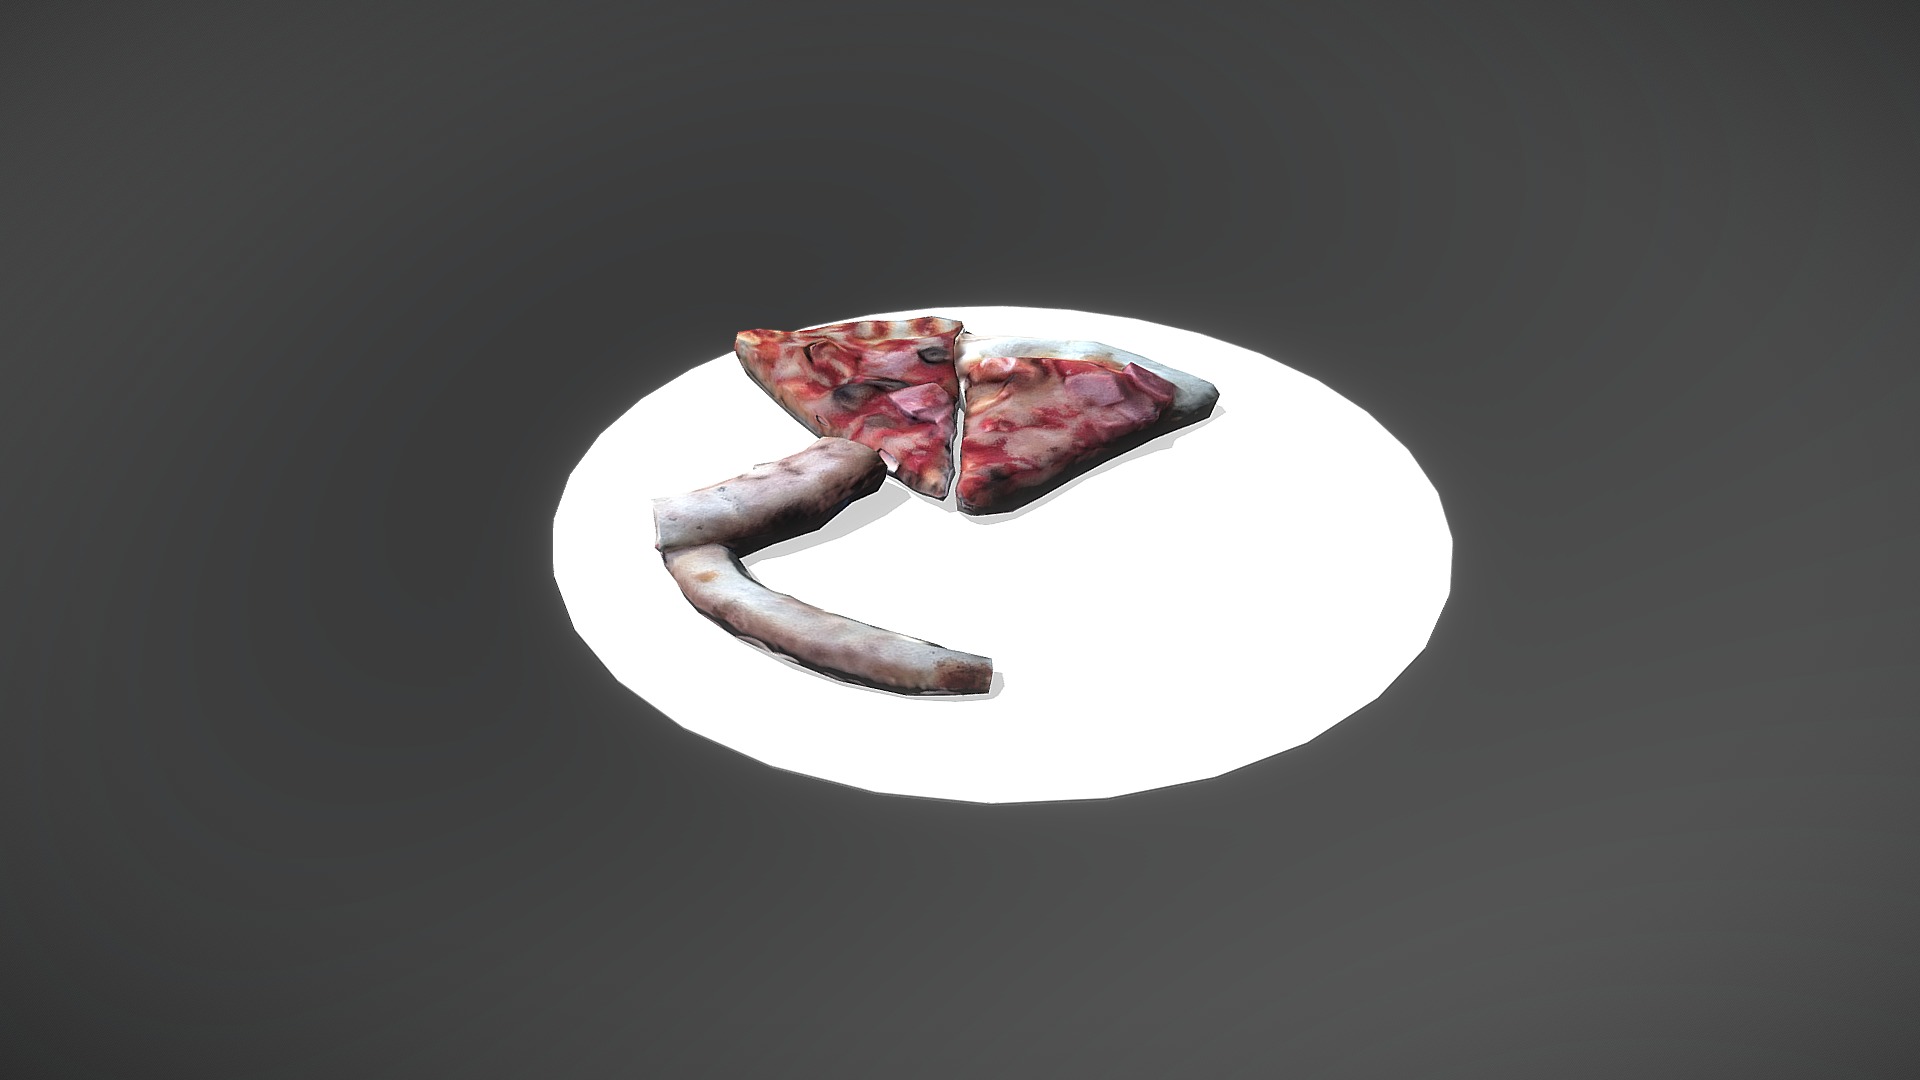 3D model Pizza - This is a 3D model of the Pizza. The 3D model is about a leaf on a plate.